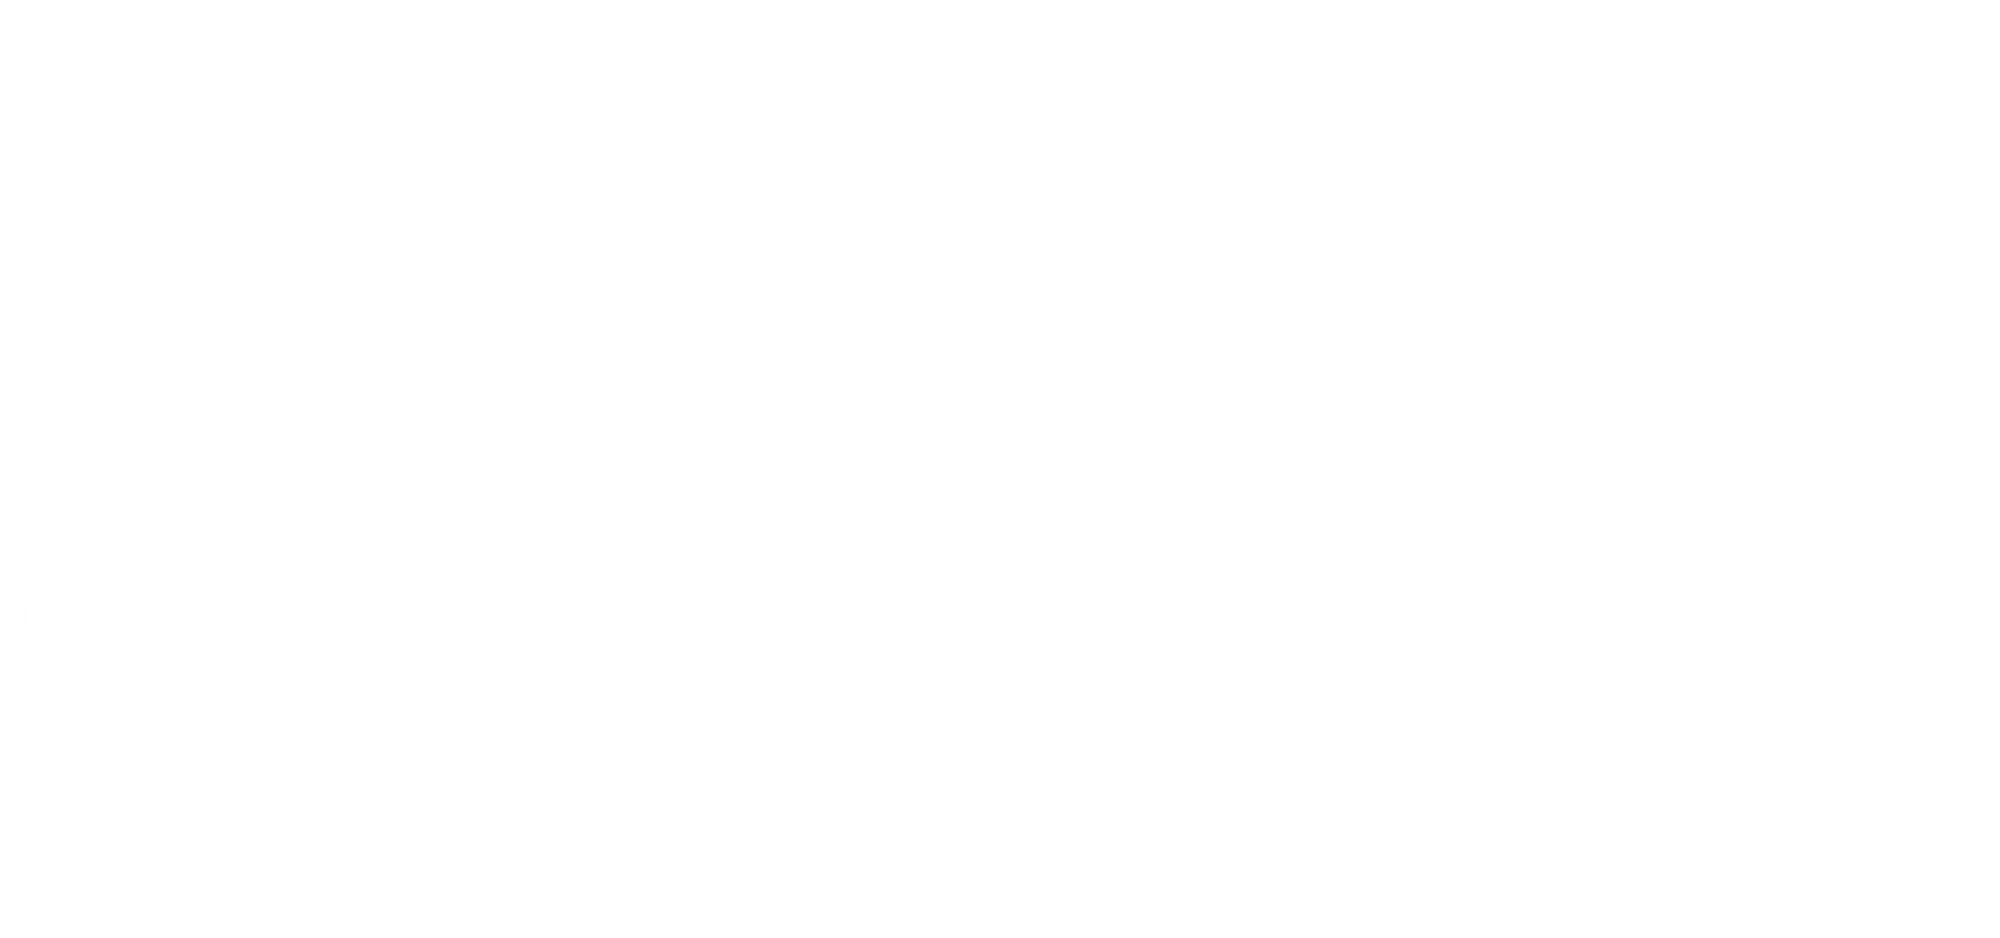 Mathematical chart with two lines depicting different linear equations, with axes labeled 1 to 4 and points plotted at key intersections